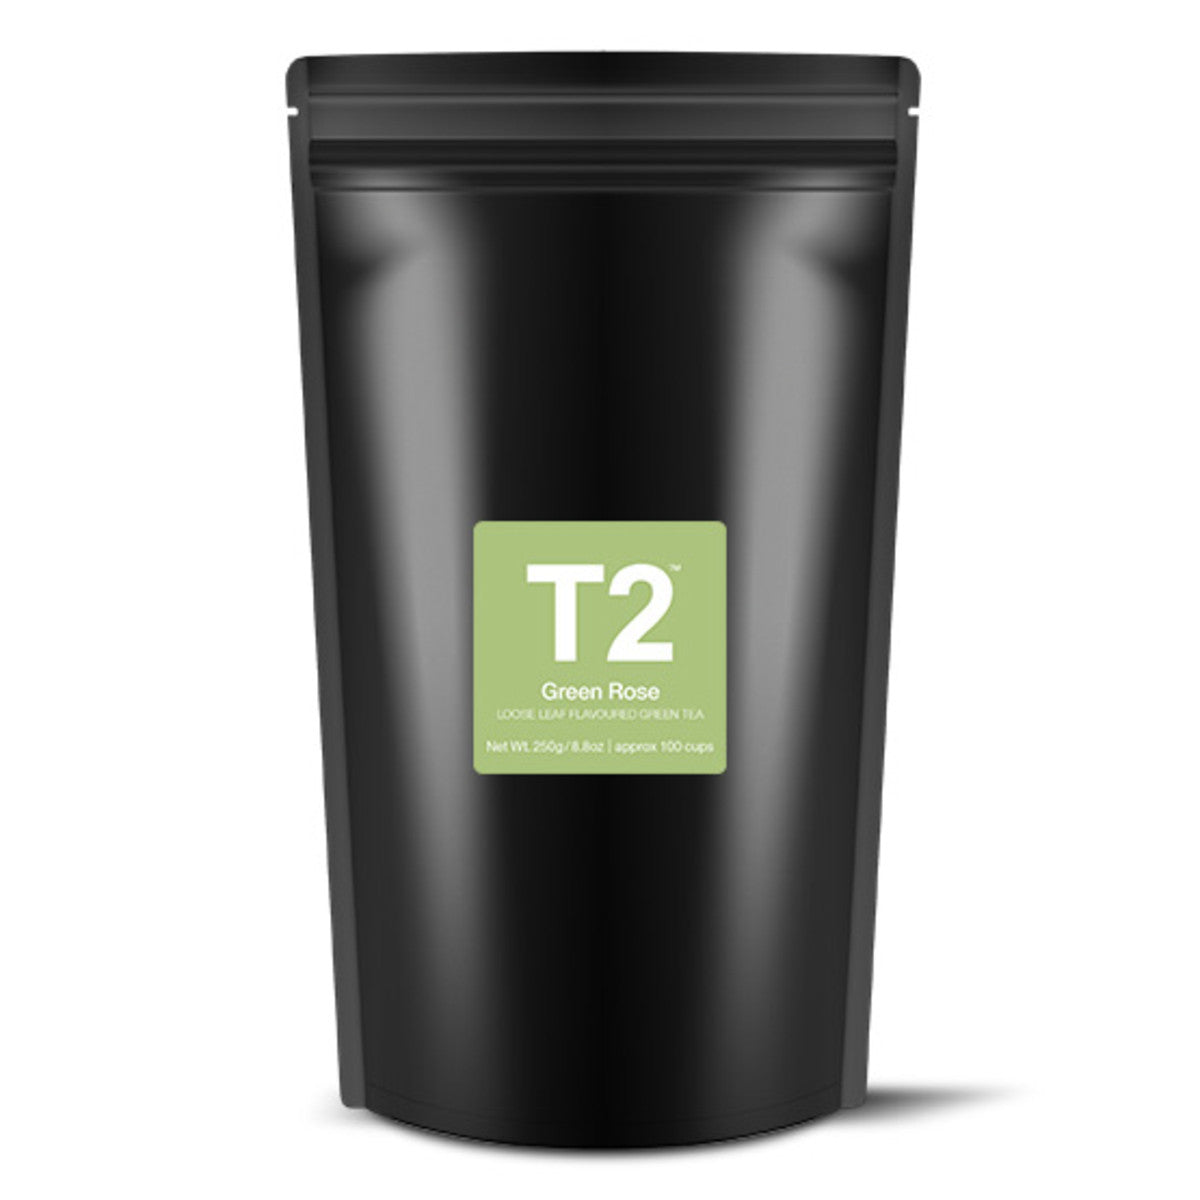 T2 - Green Rose 250g Loose Leaf Refill Pouch